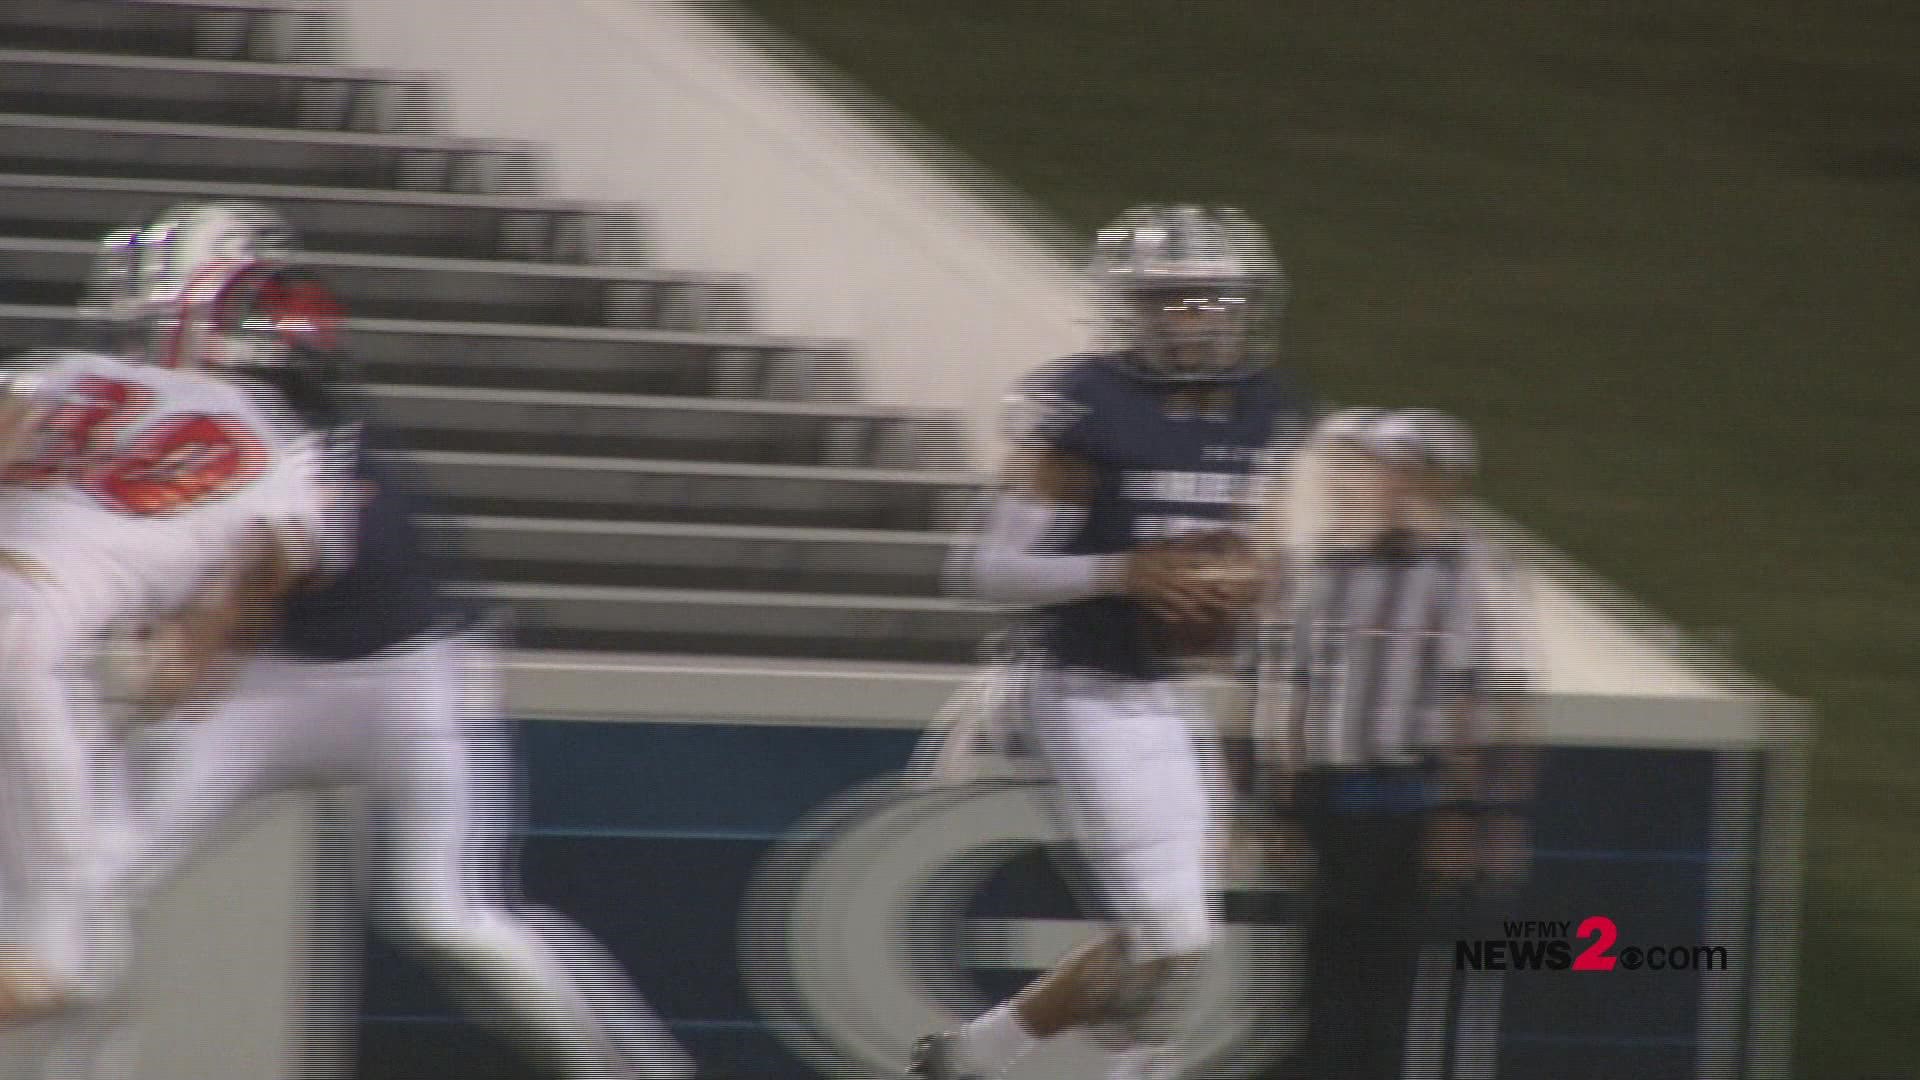 Early highlights from Davie County vs Grimsley in the first round of the high school playoffs.